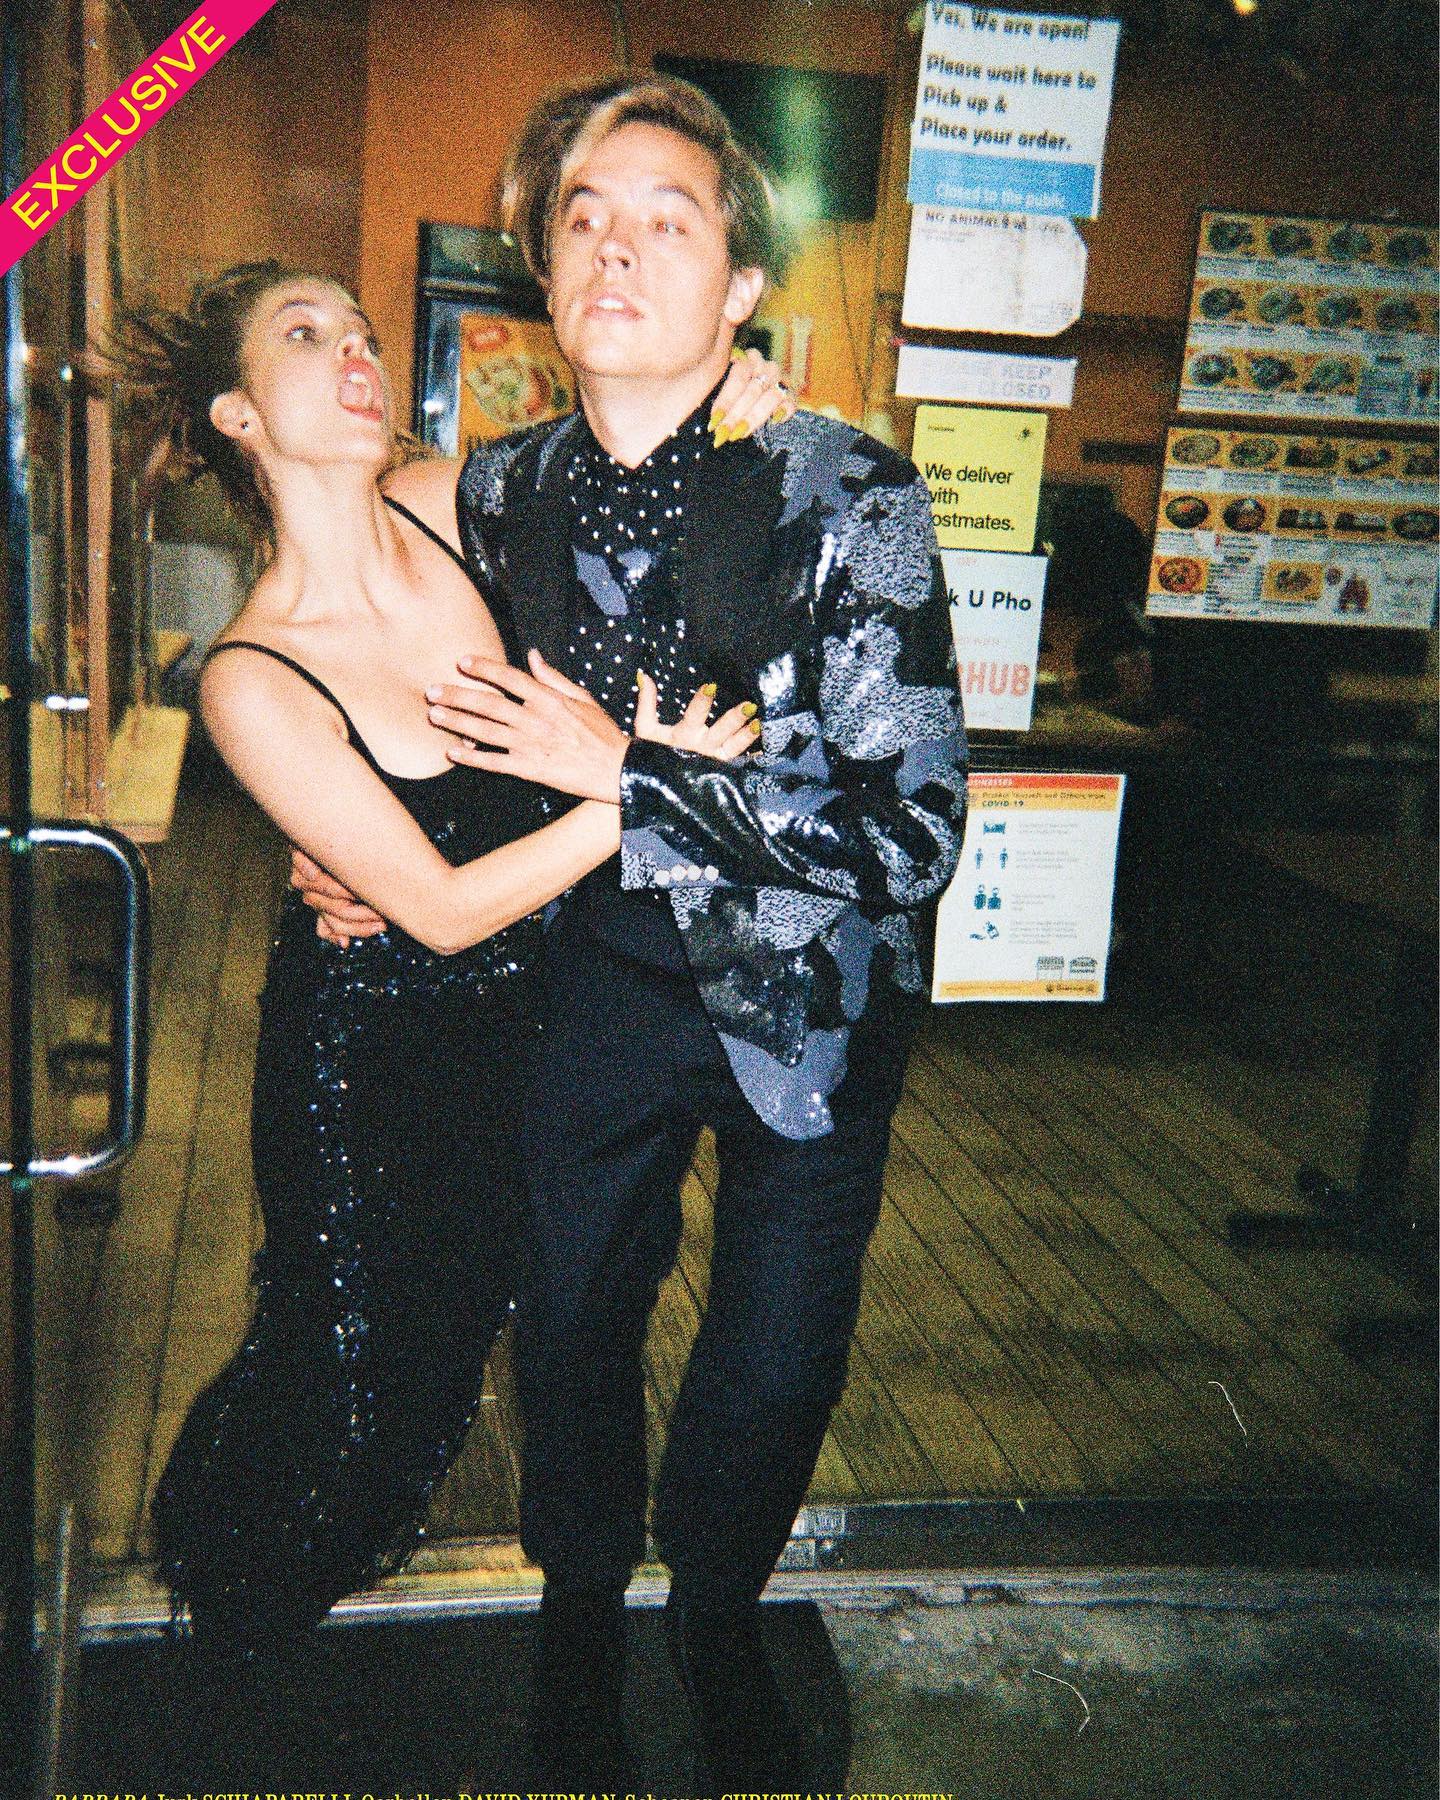 Barbara Palvin y Dylan Sprouse Hit the Cover! - Photo 3